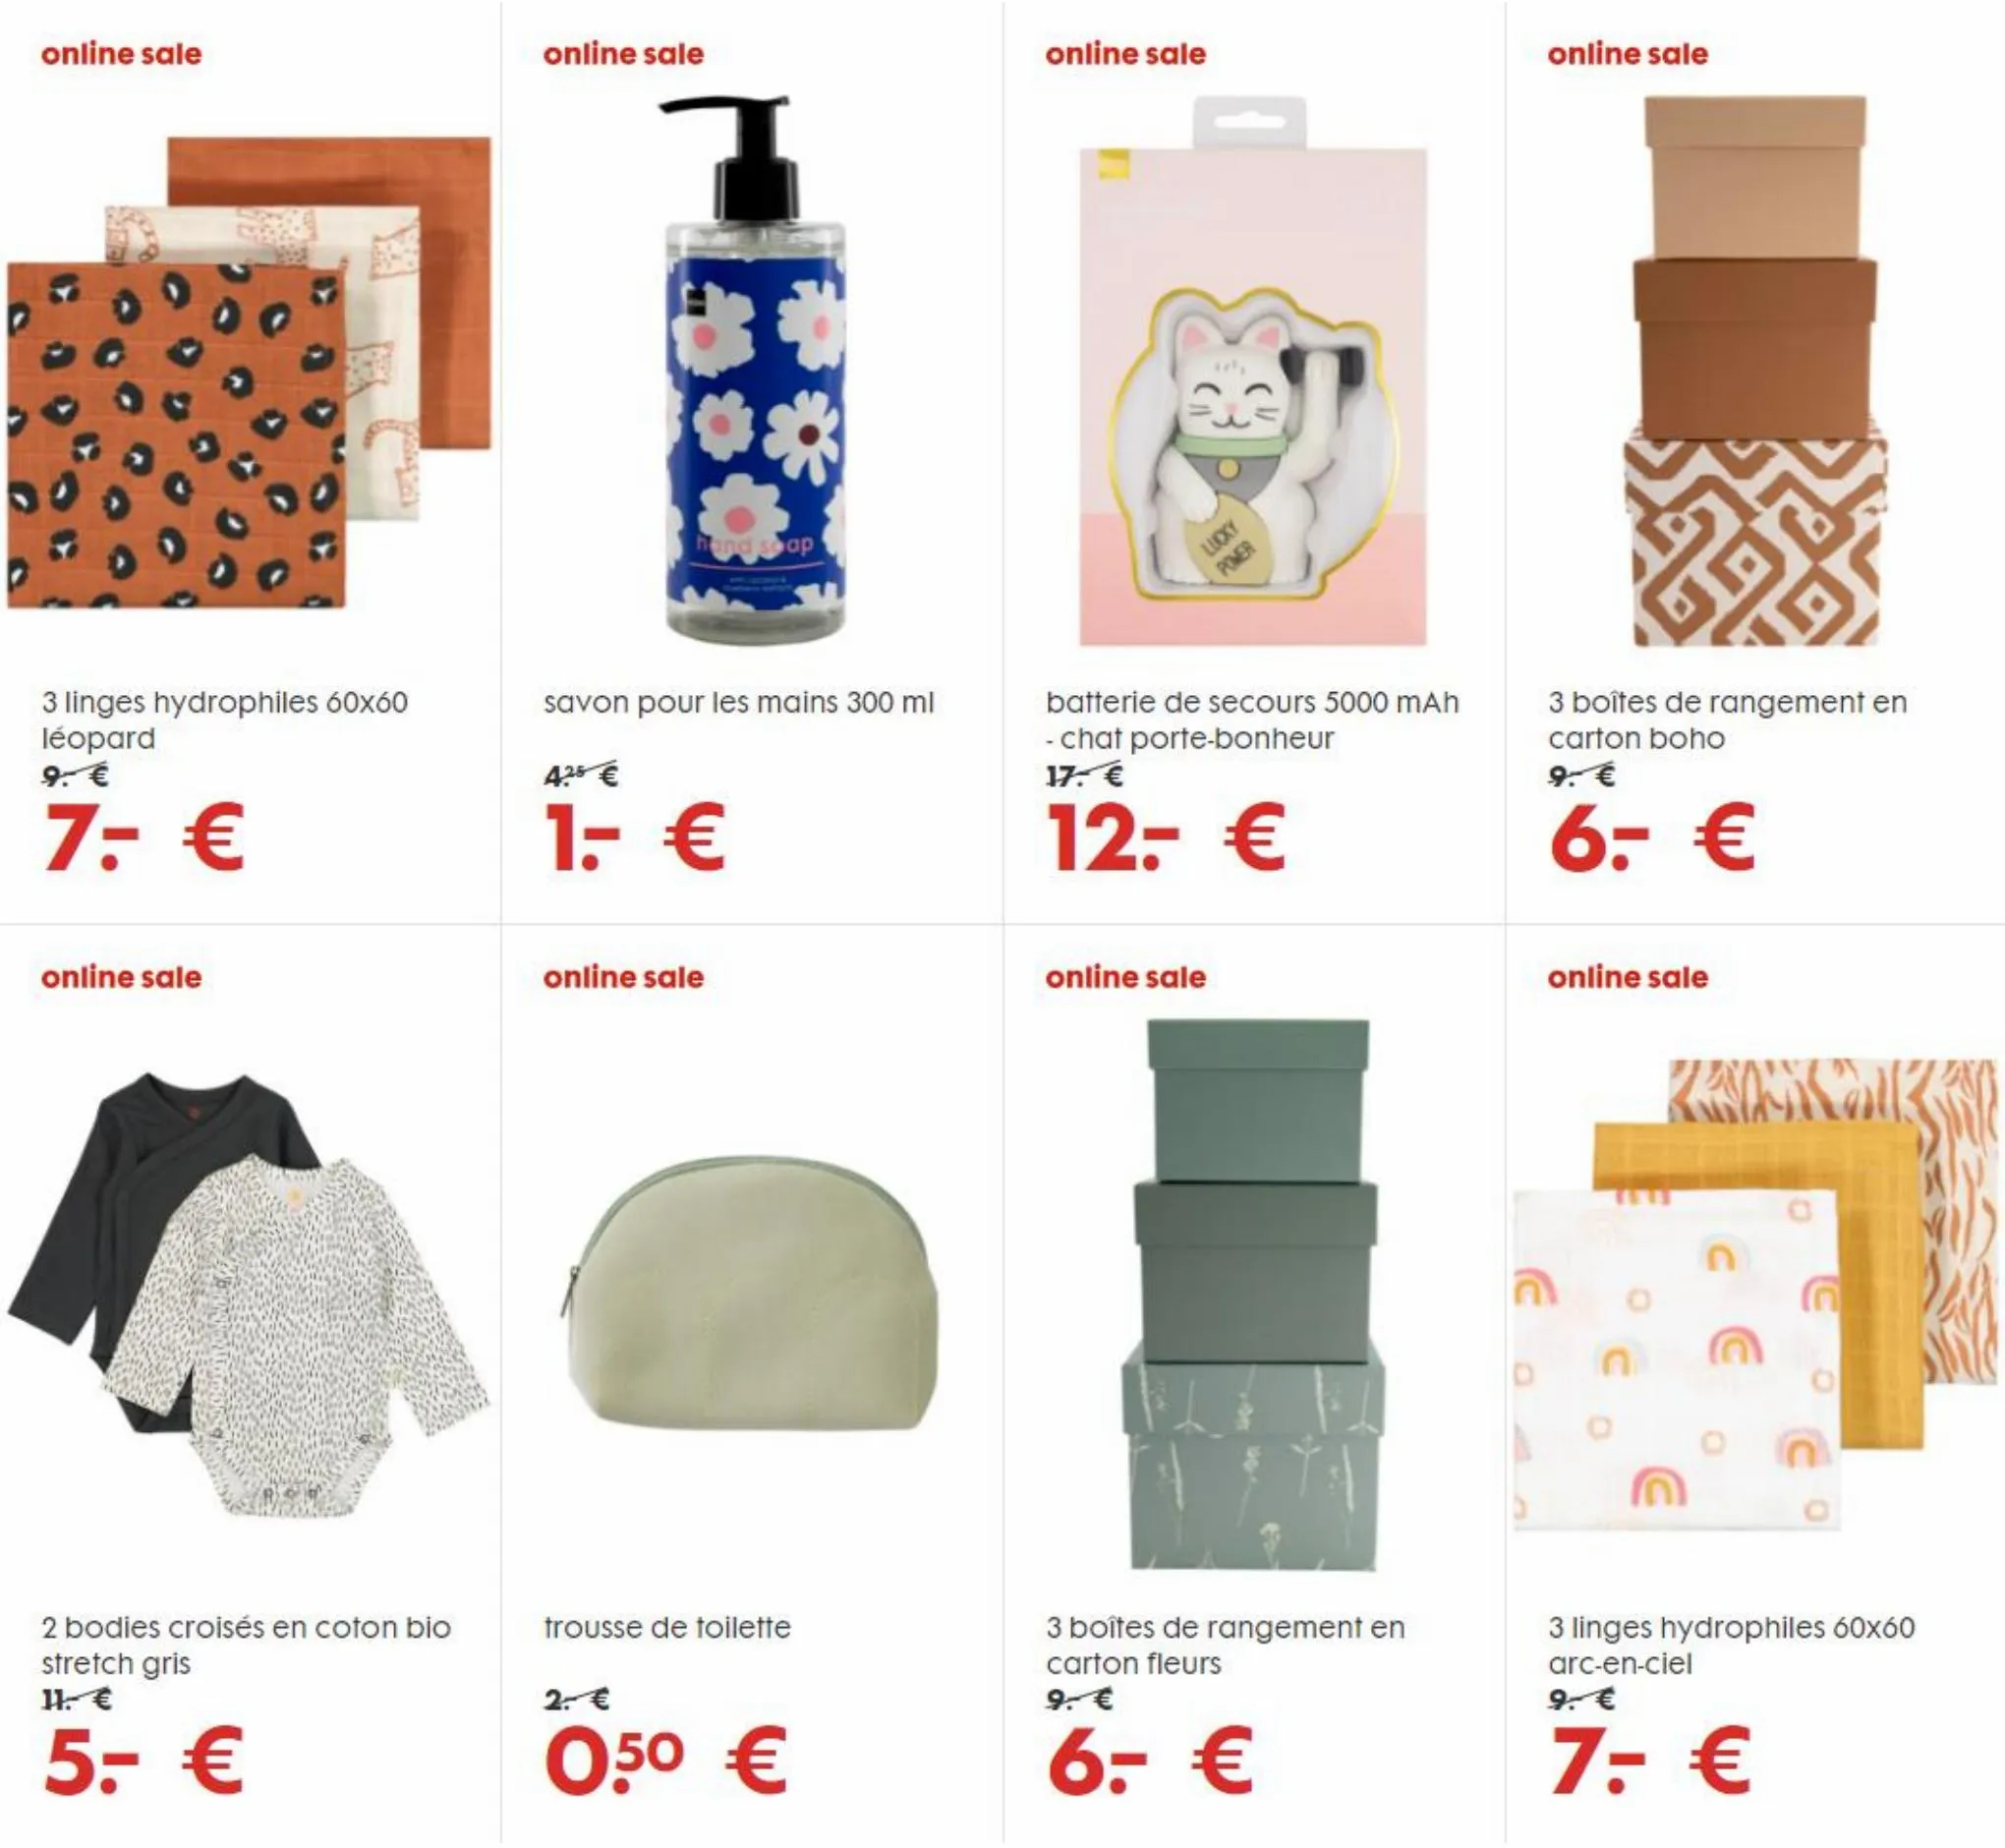 Catalogue SOLDES -70%, page 00004